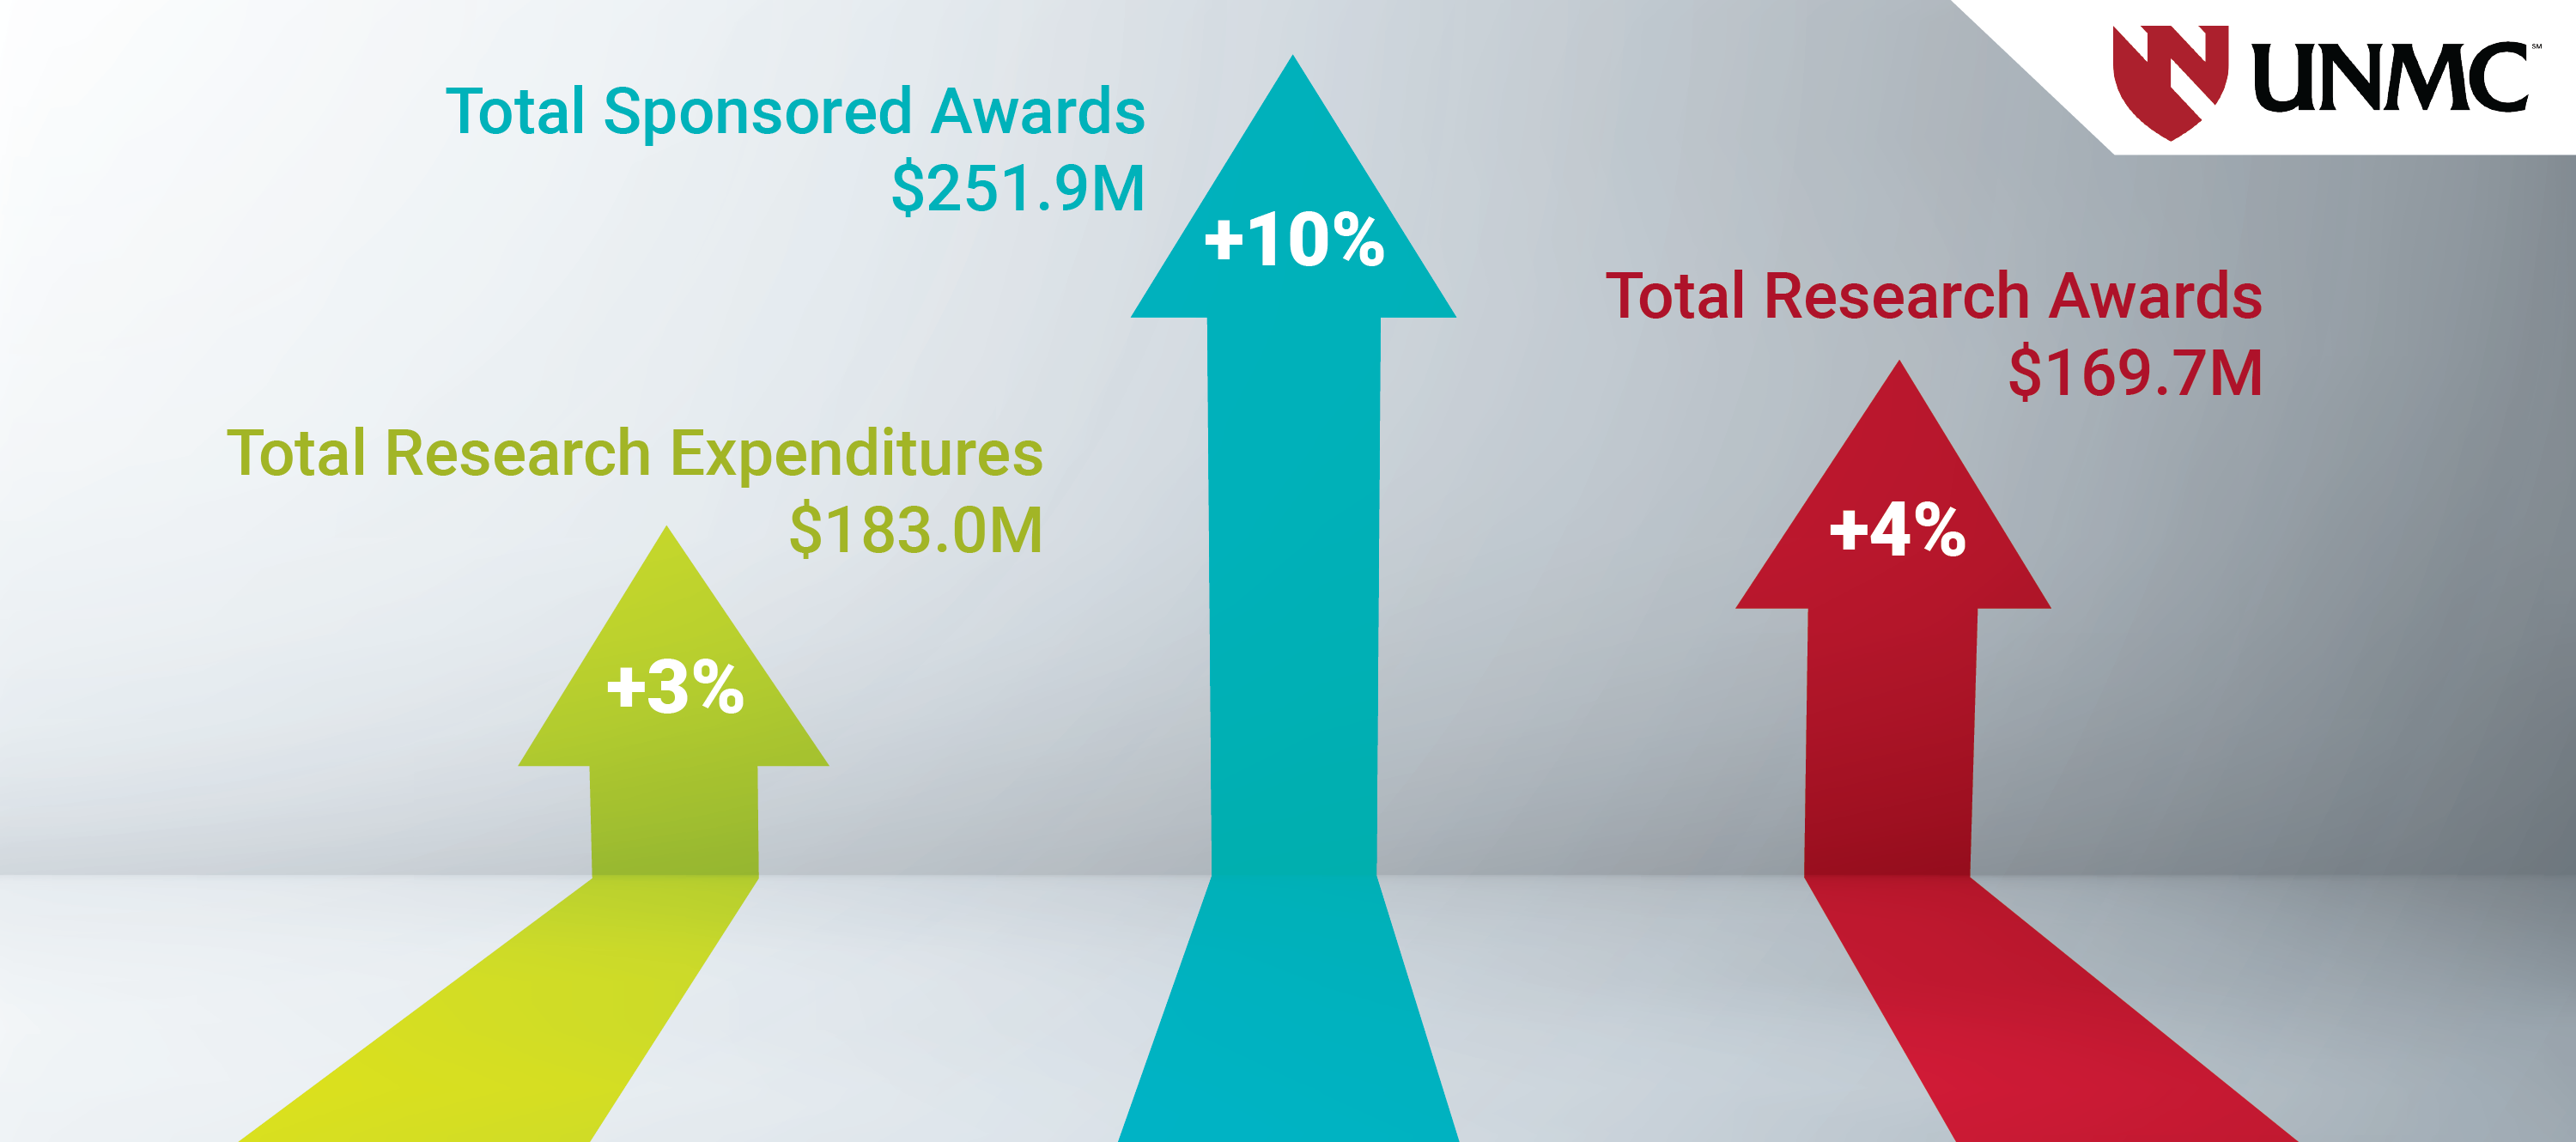 UNMC’s research expenditures reach new annual record